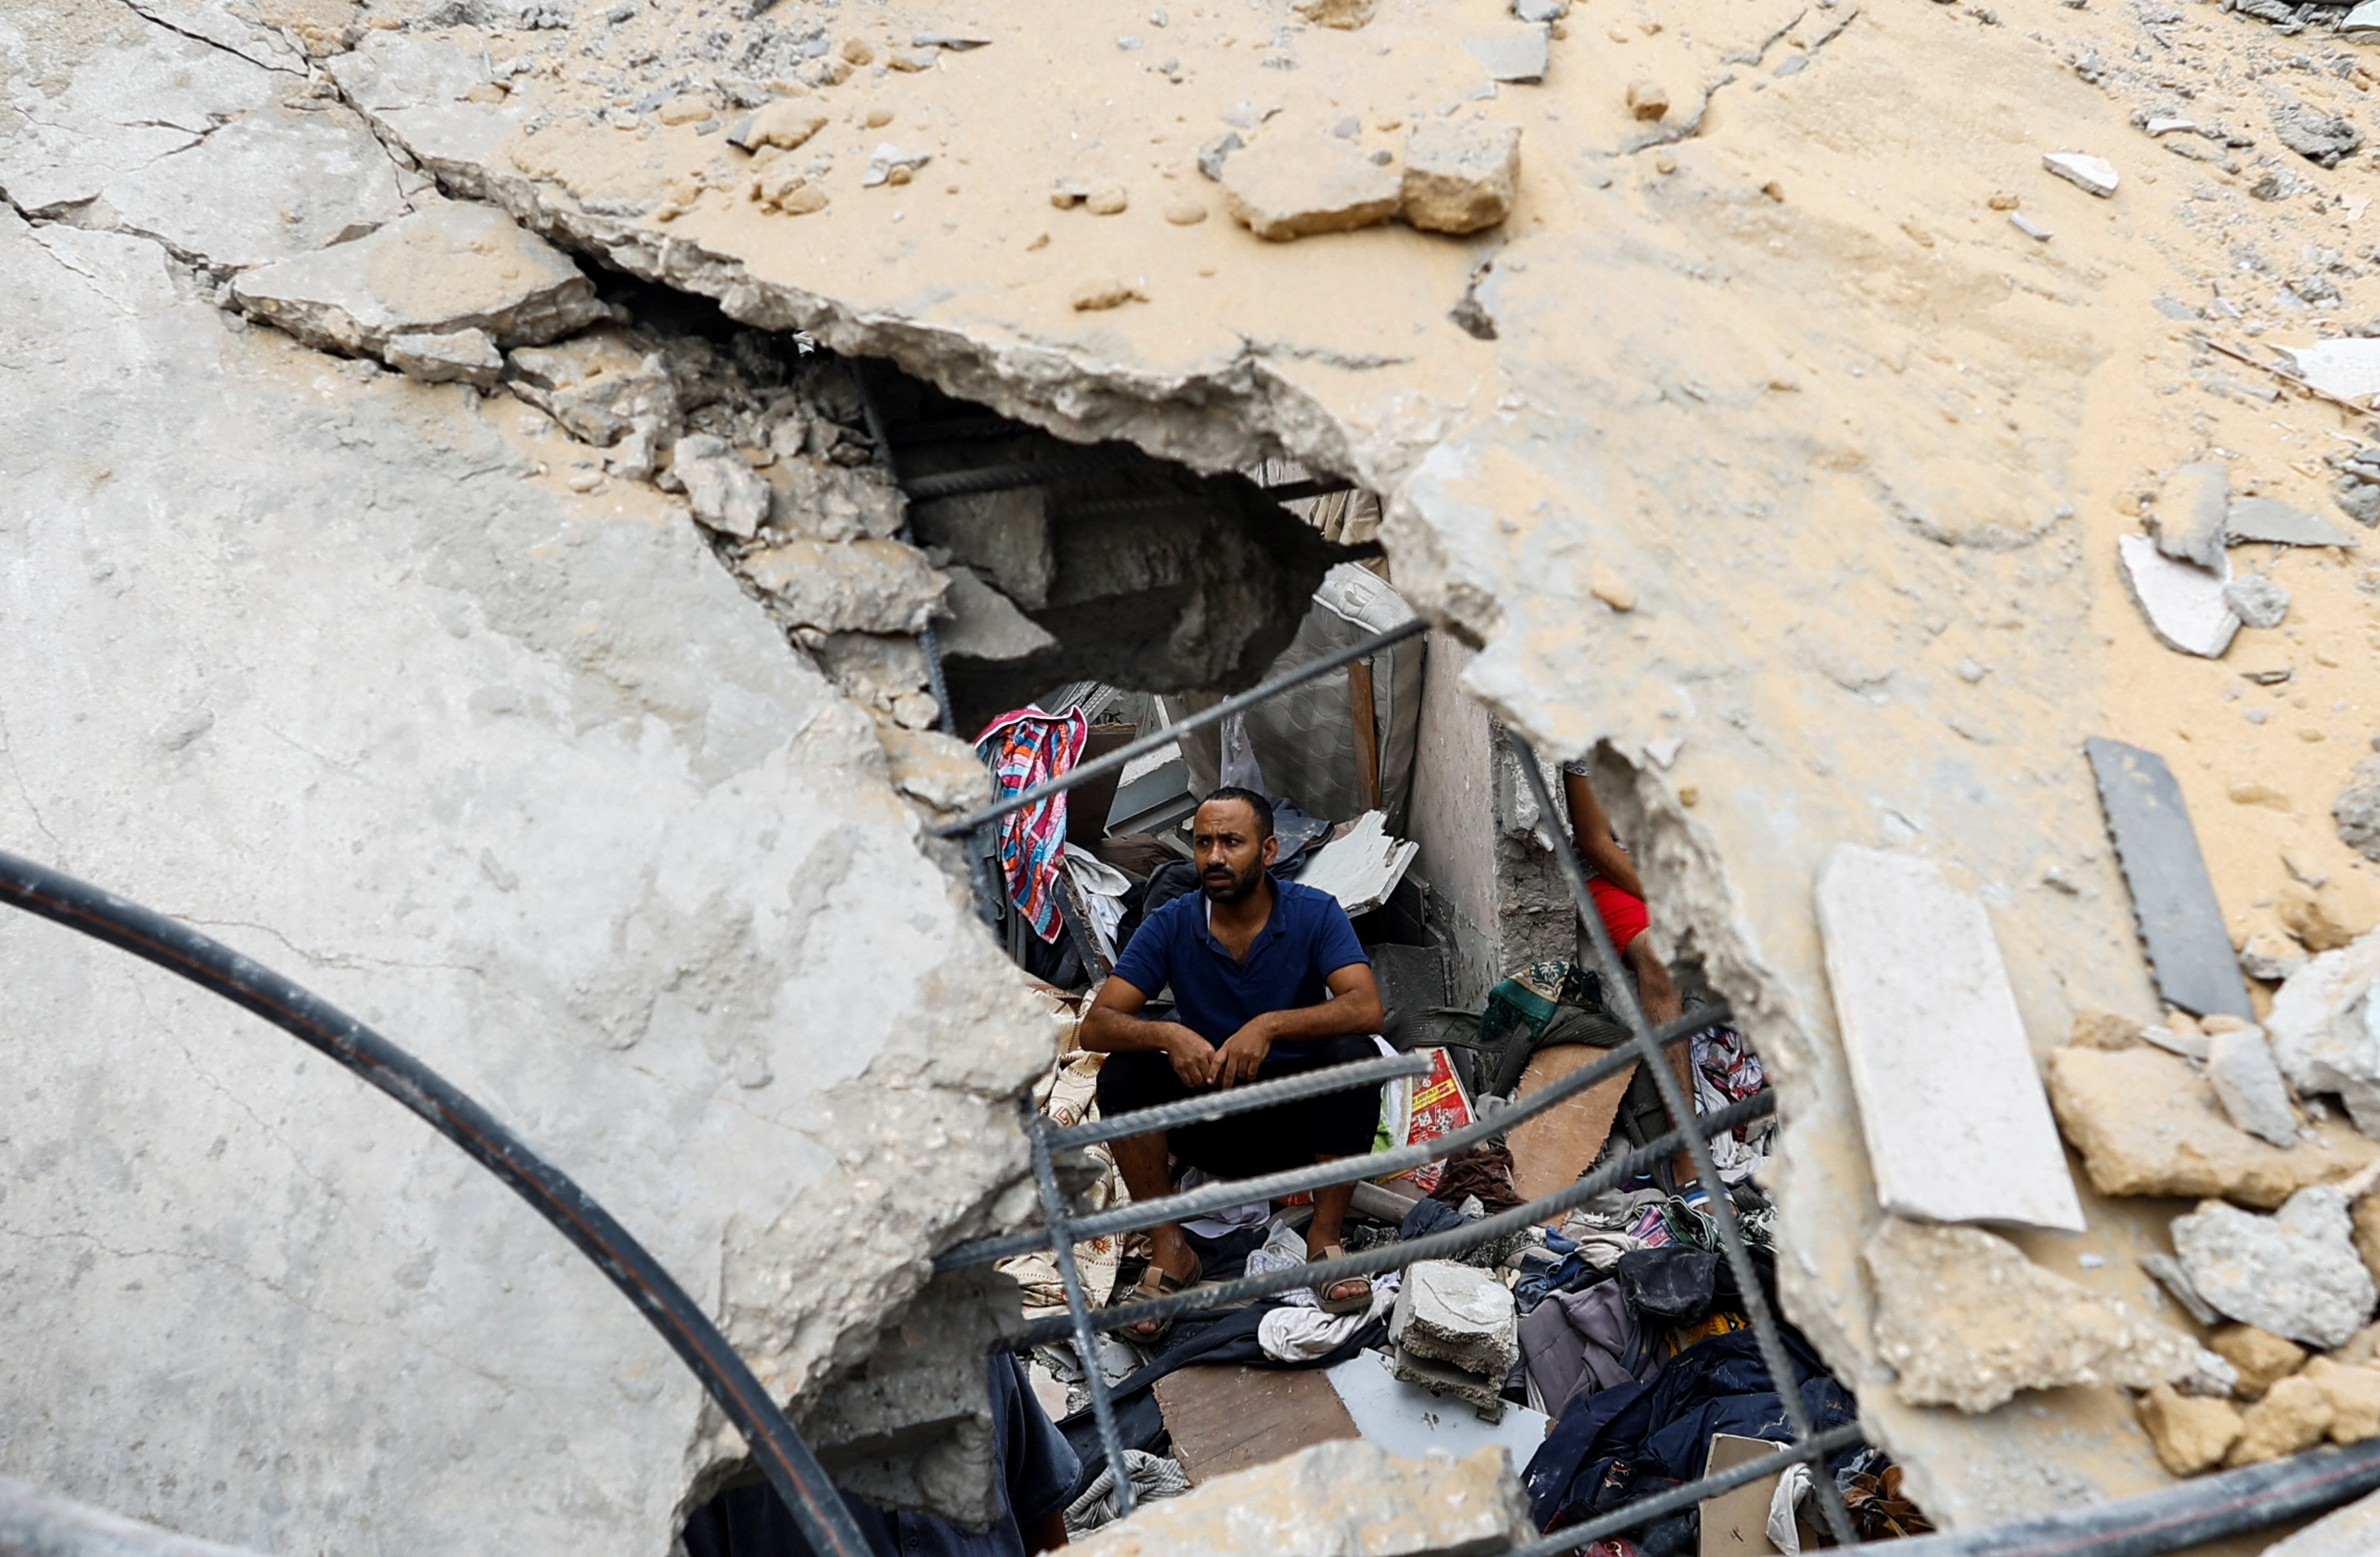 A Palestinian man sits amidst the rubble at the site of Israeli strikes on houses in Khan Younis